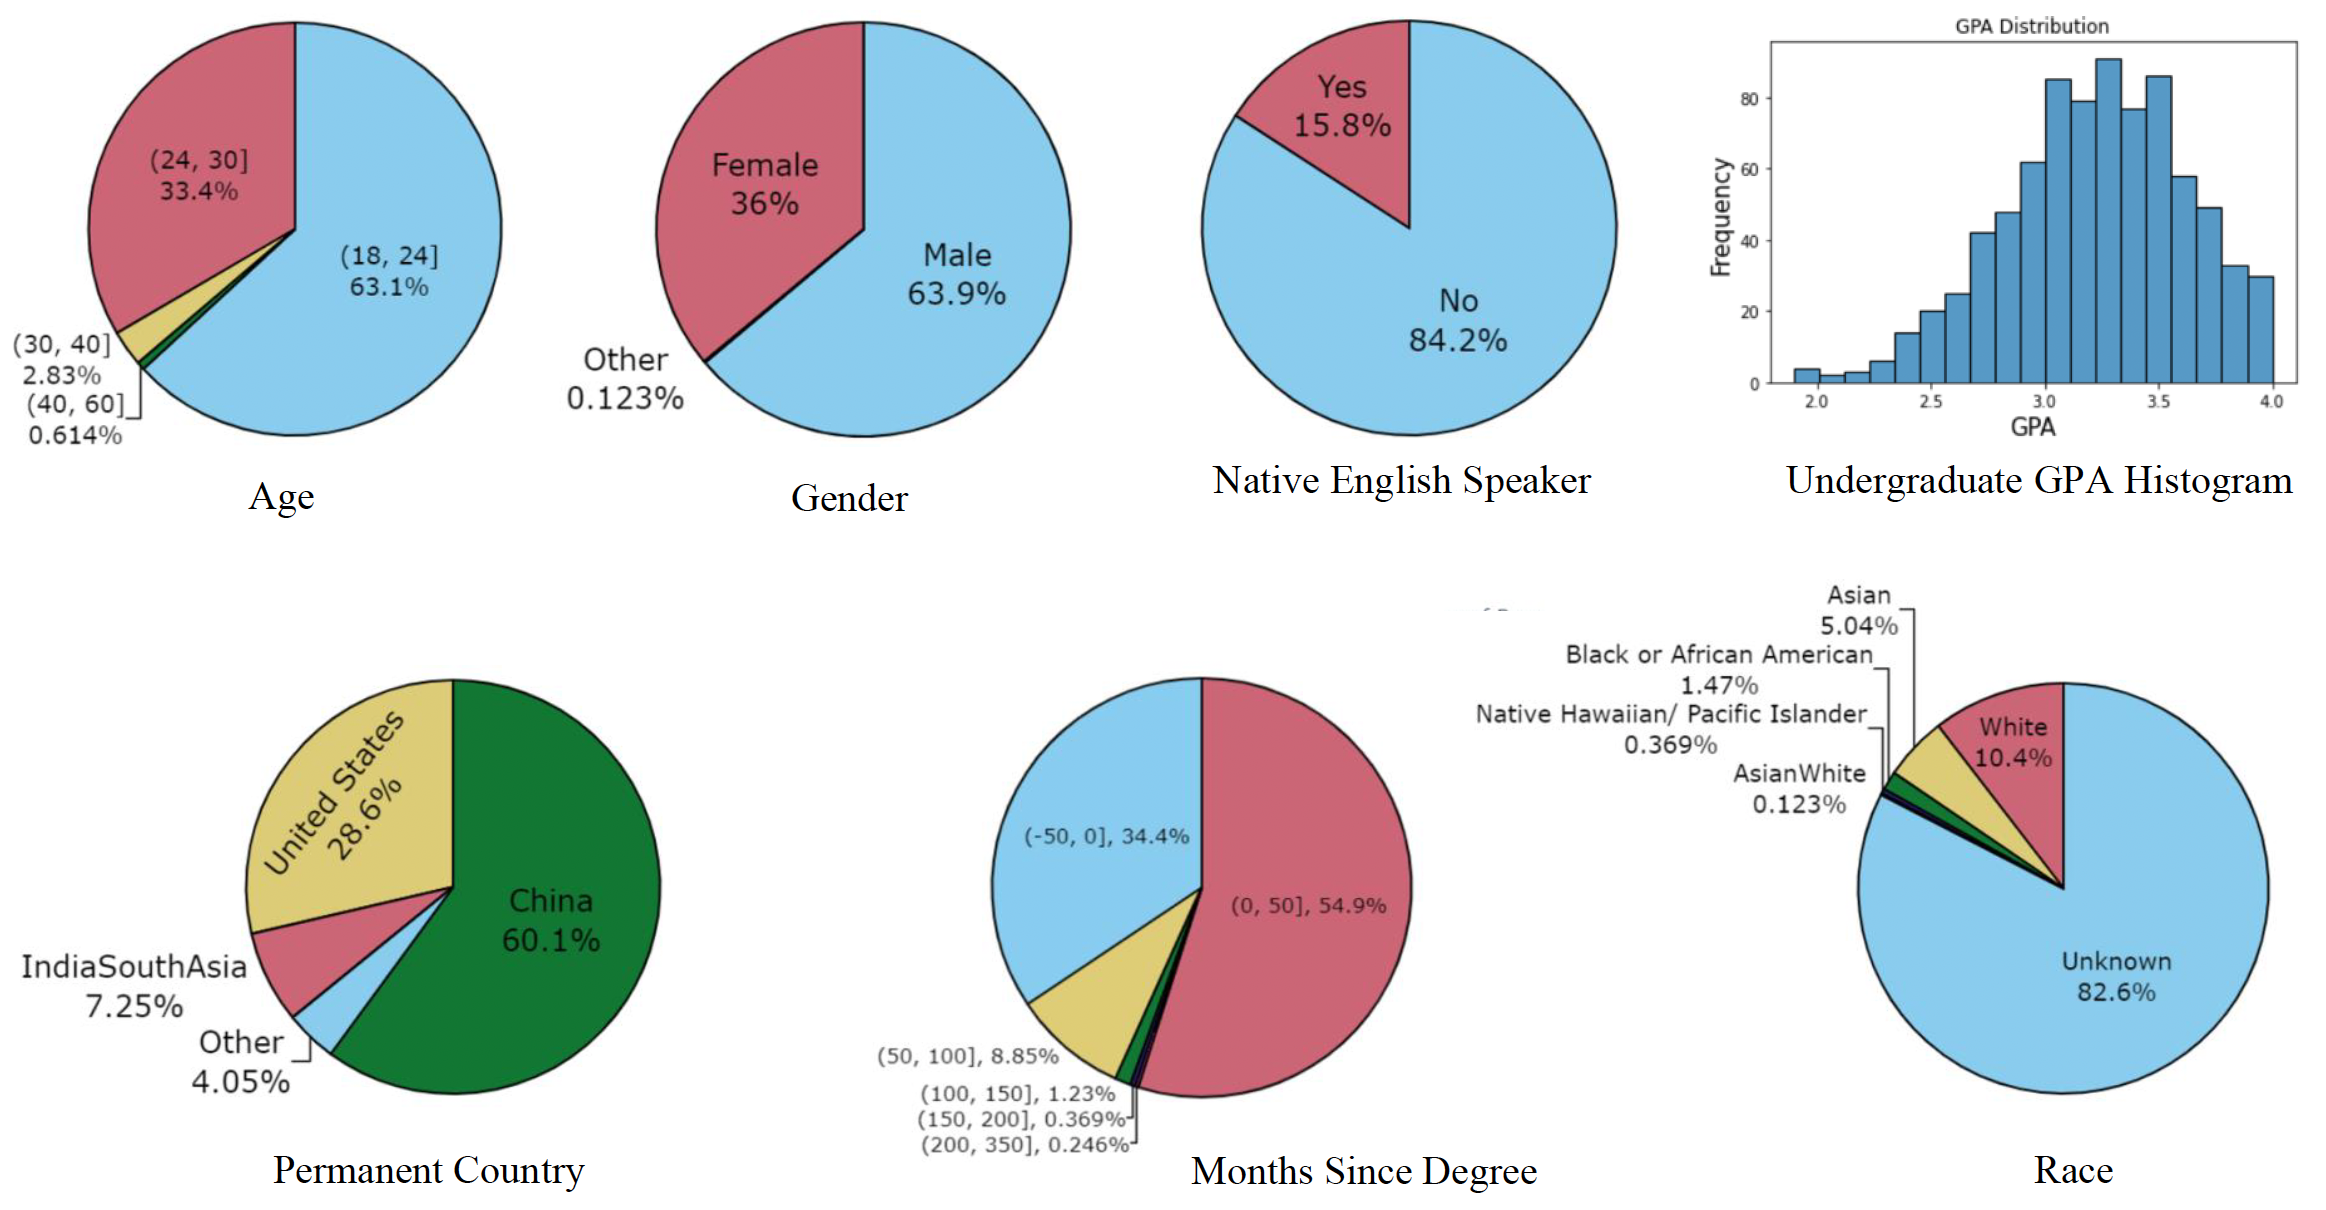 Statistics of Demographic and Academic Credential Features